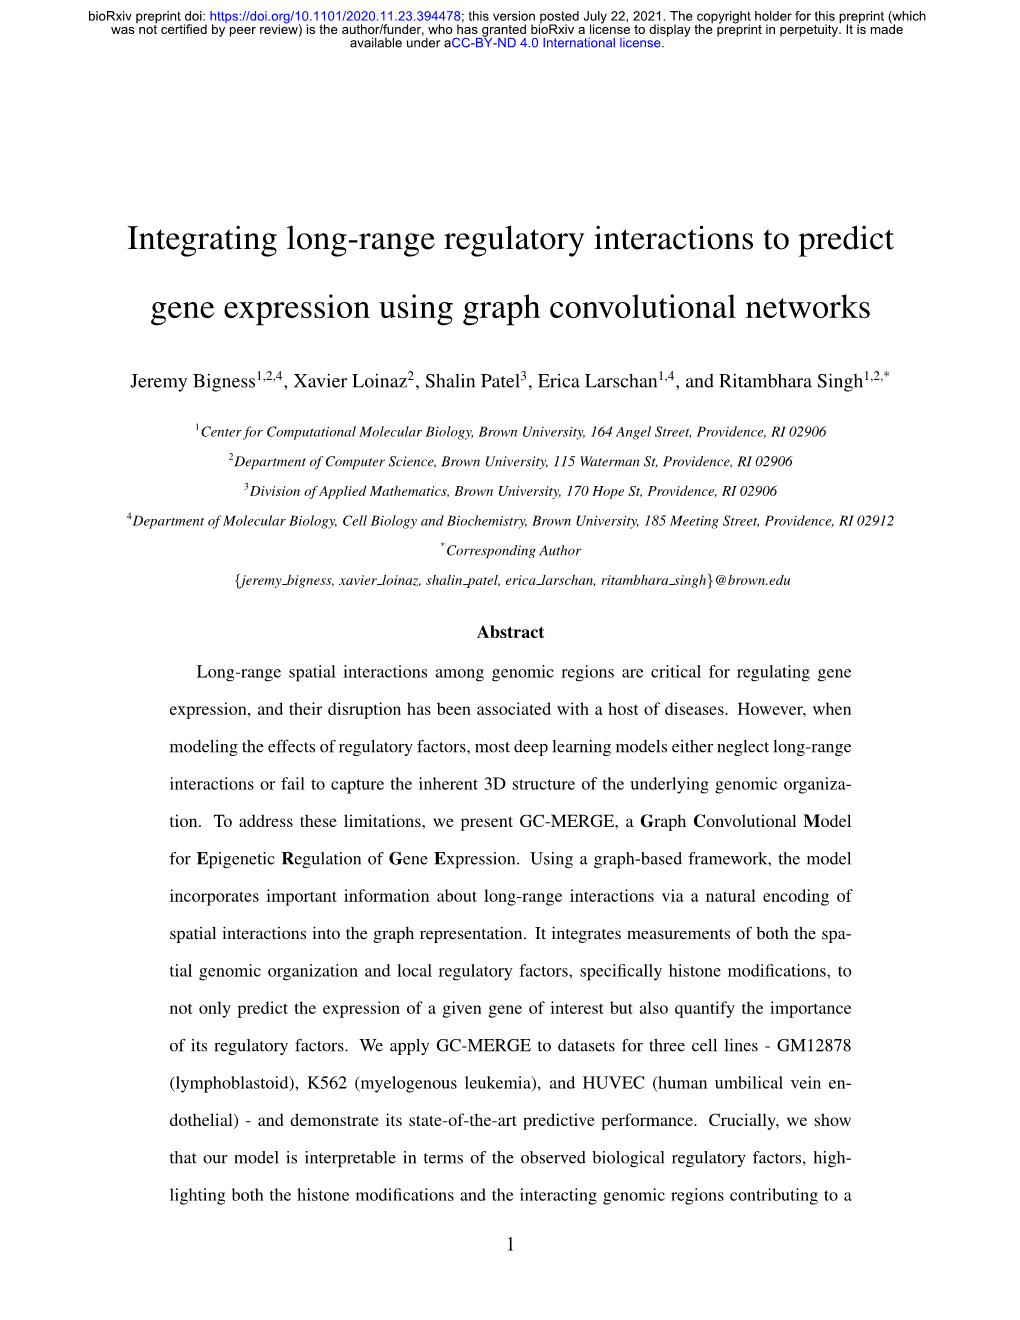 Integrating Long-Range Regulatory Interactions to Predict Gene Expression Using Graph Convolutional Networks